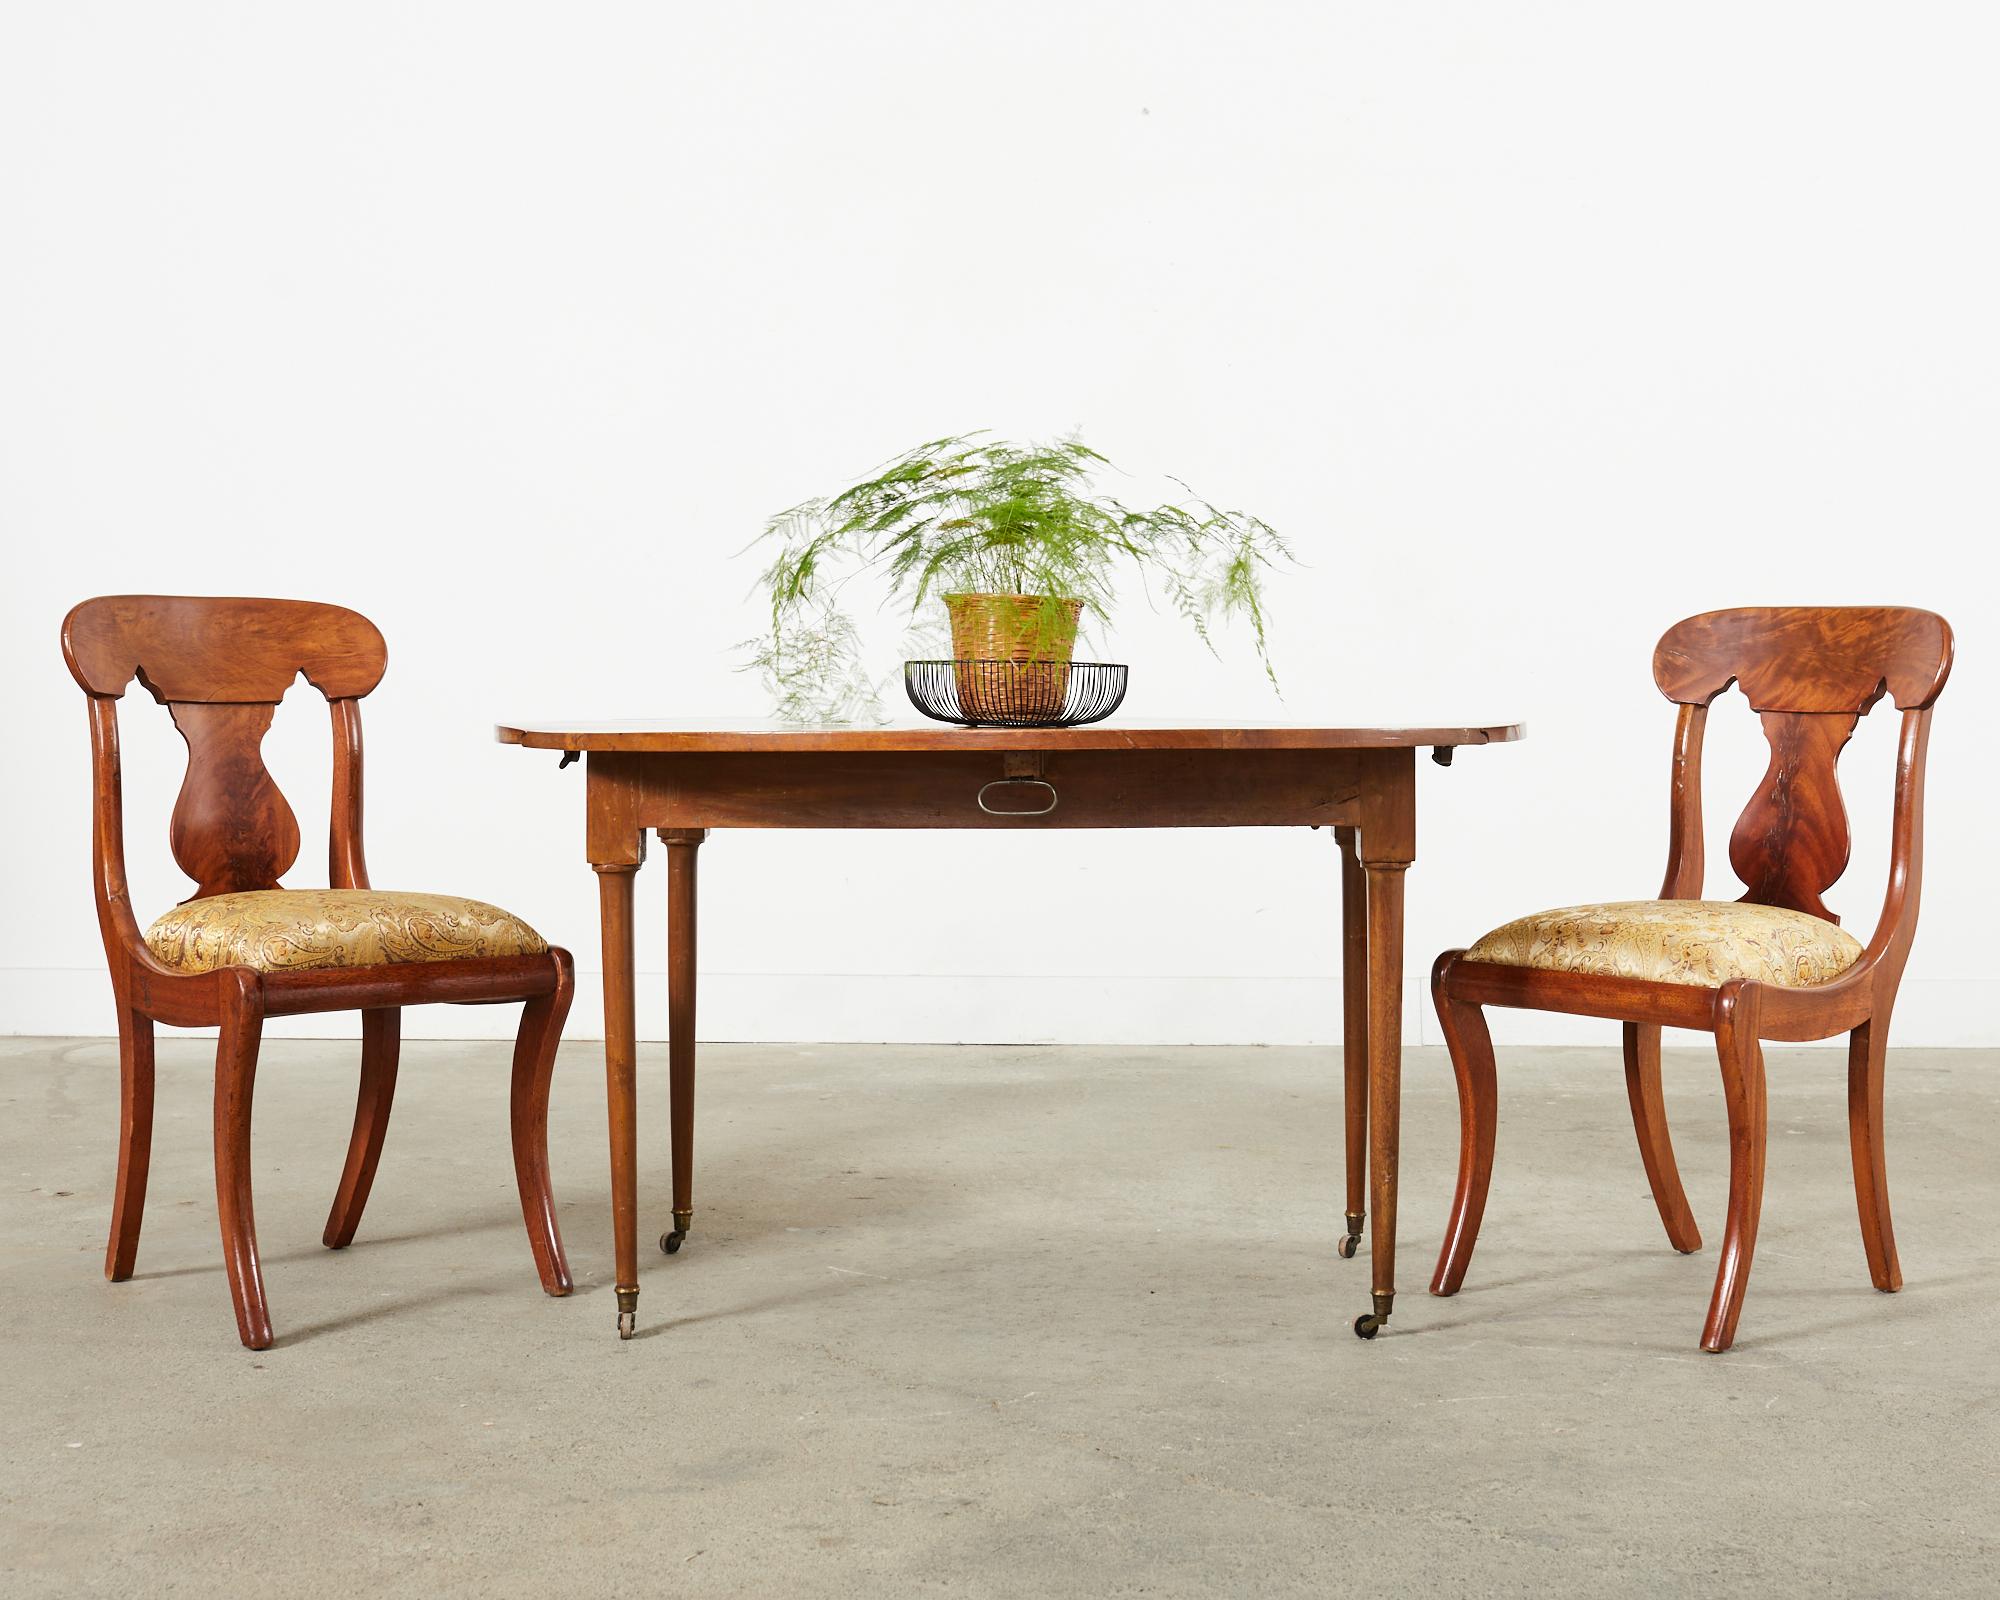 Distinctive set of eight French dining chairs crafted from radiant flame mahogany veneers. The chairs are made in the Empire revival style with a gracefully curved vasiform shaped back splat. The seat is supported by klismos style saber legs for a